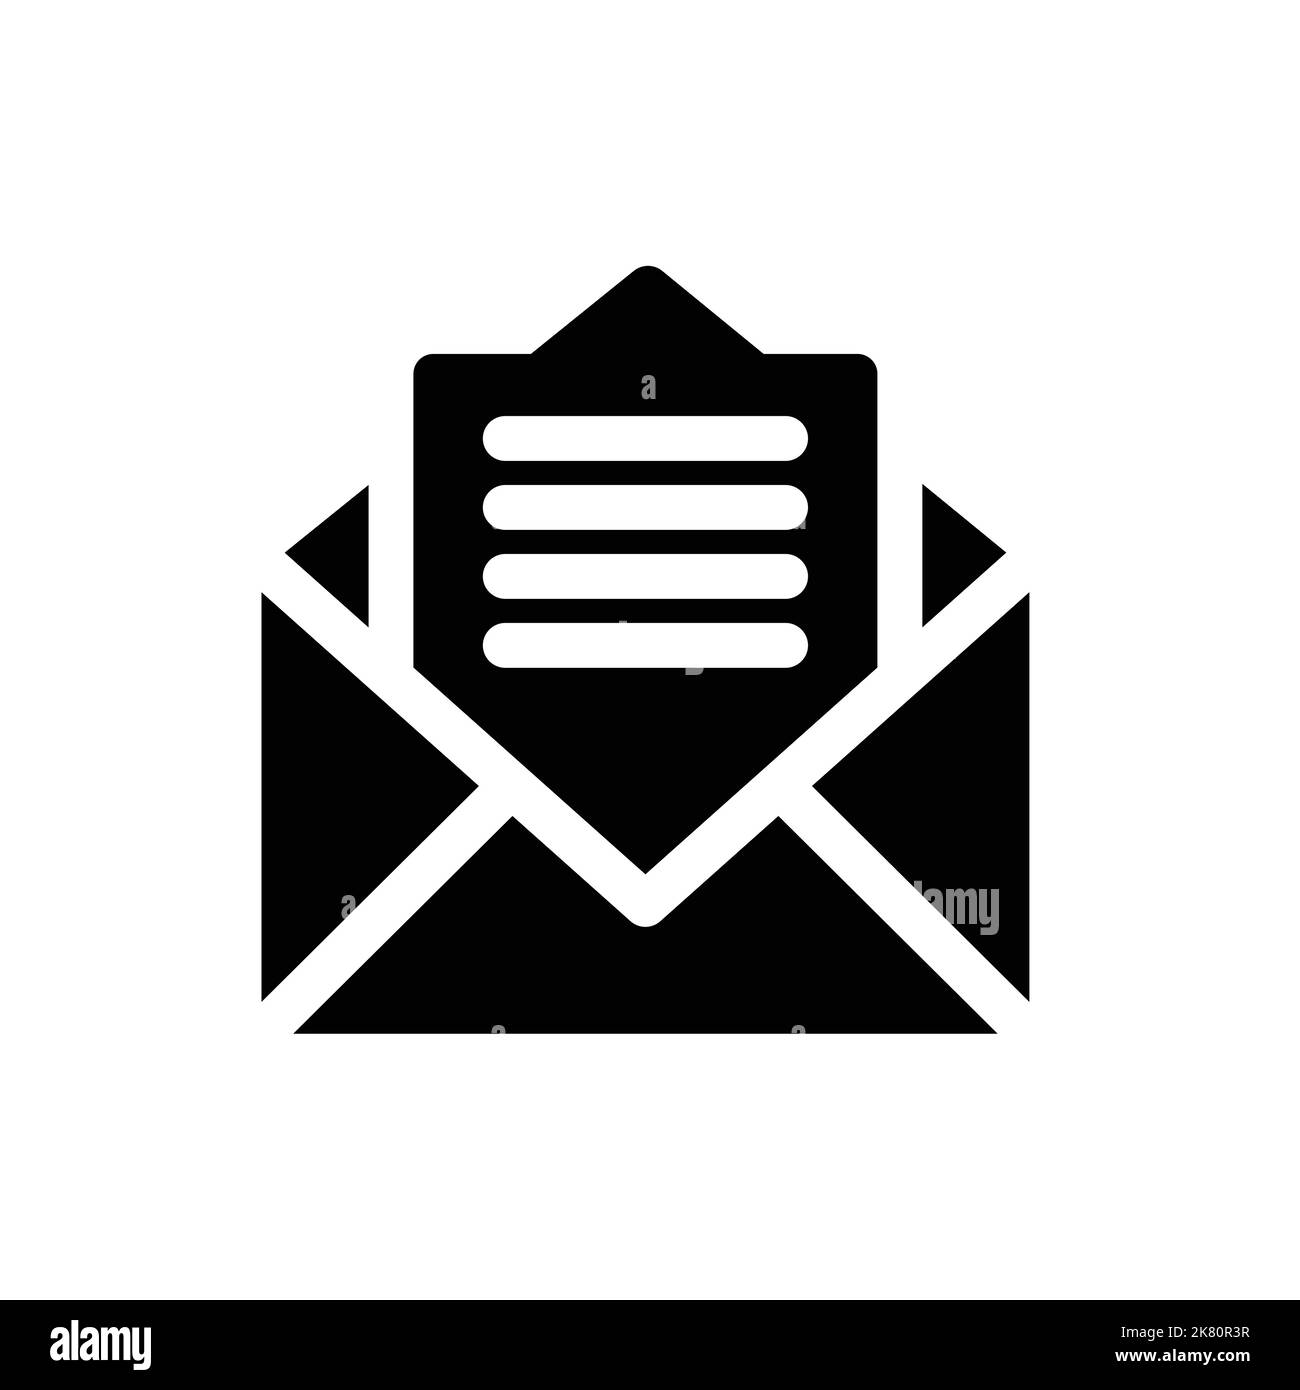 open mail black flat style icon, vector illustration on white isolated background. Stock Vector